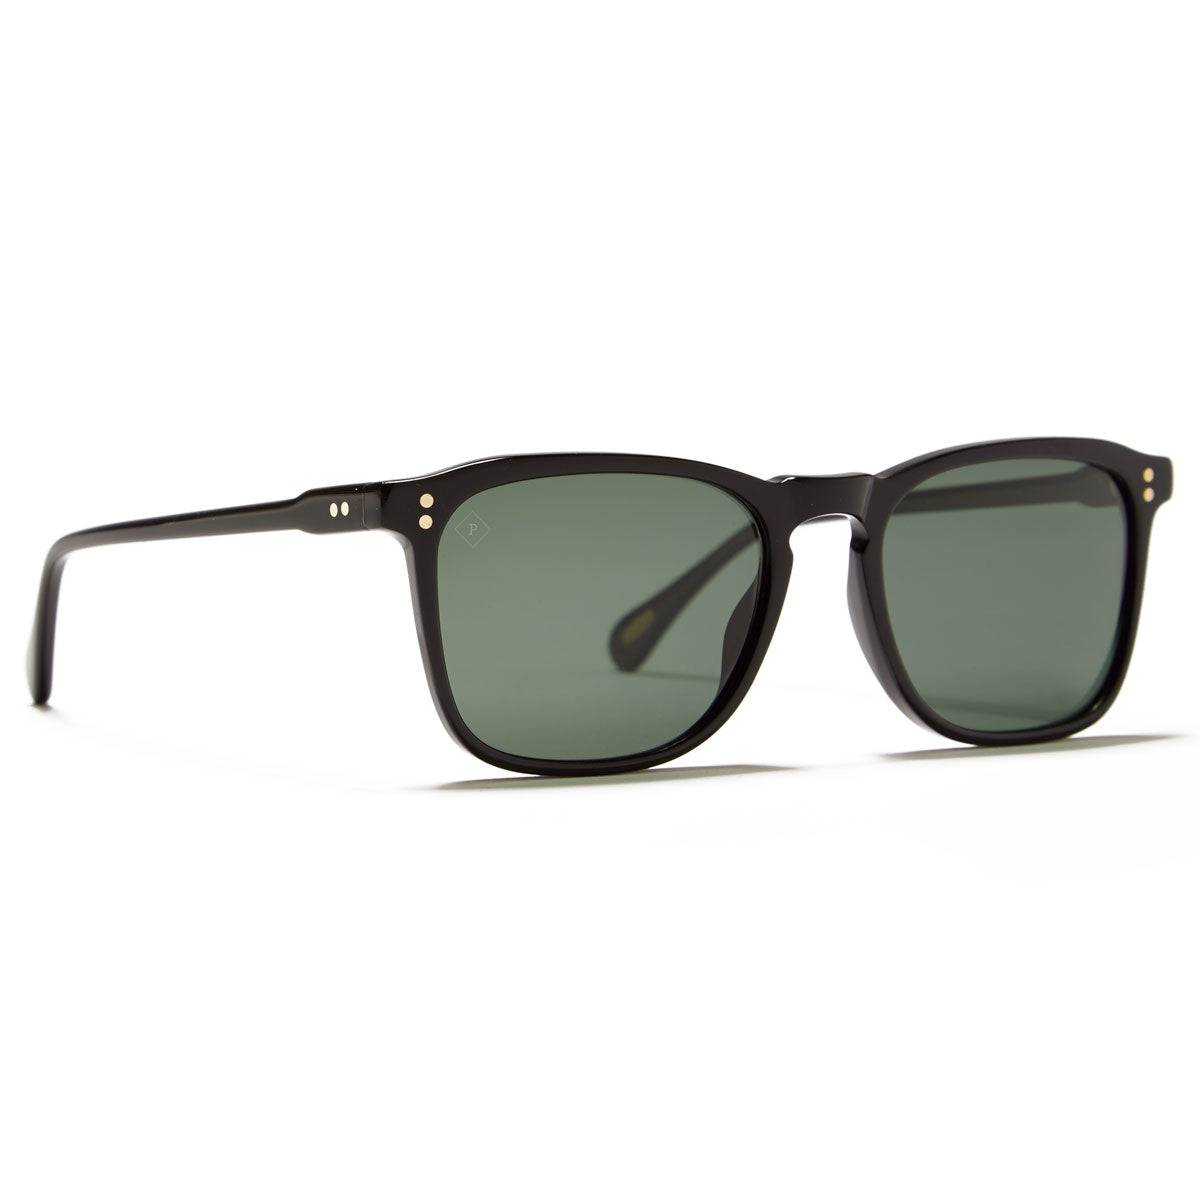 Raen Wiley 54 Sunglasses - Recycled Black/Green Polarized image 1